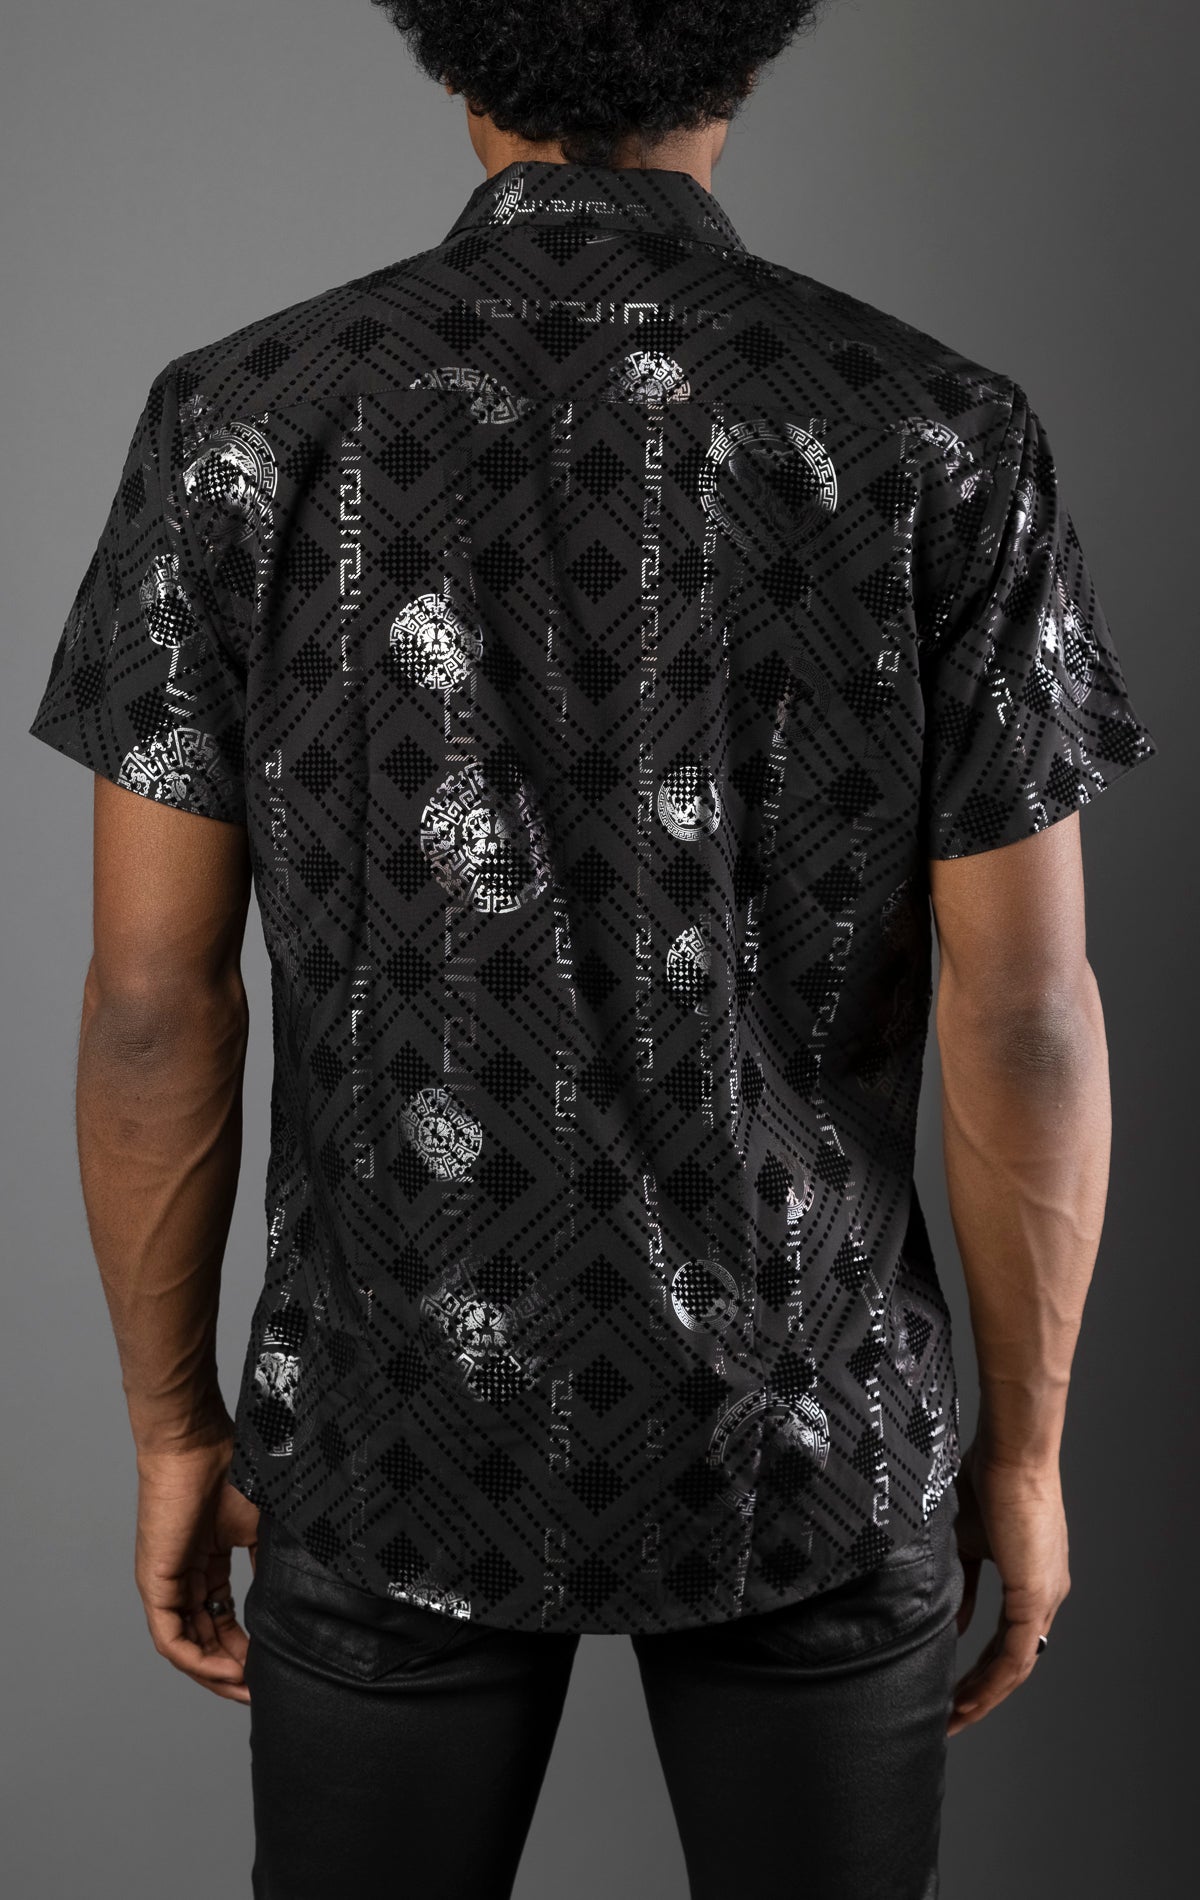 Black Men's casual, relaxed-fit button-down shirt with a short sleeve design. The shirt features an all-over Greek key pattern and a front button closure.